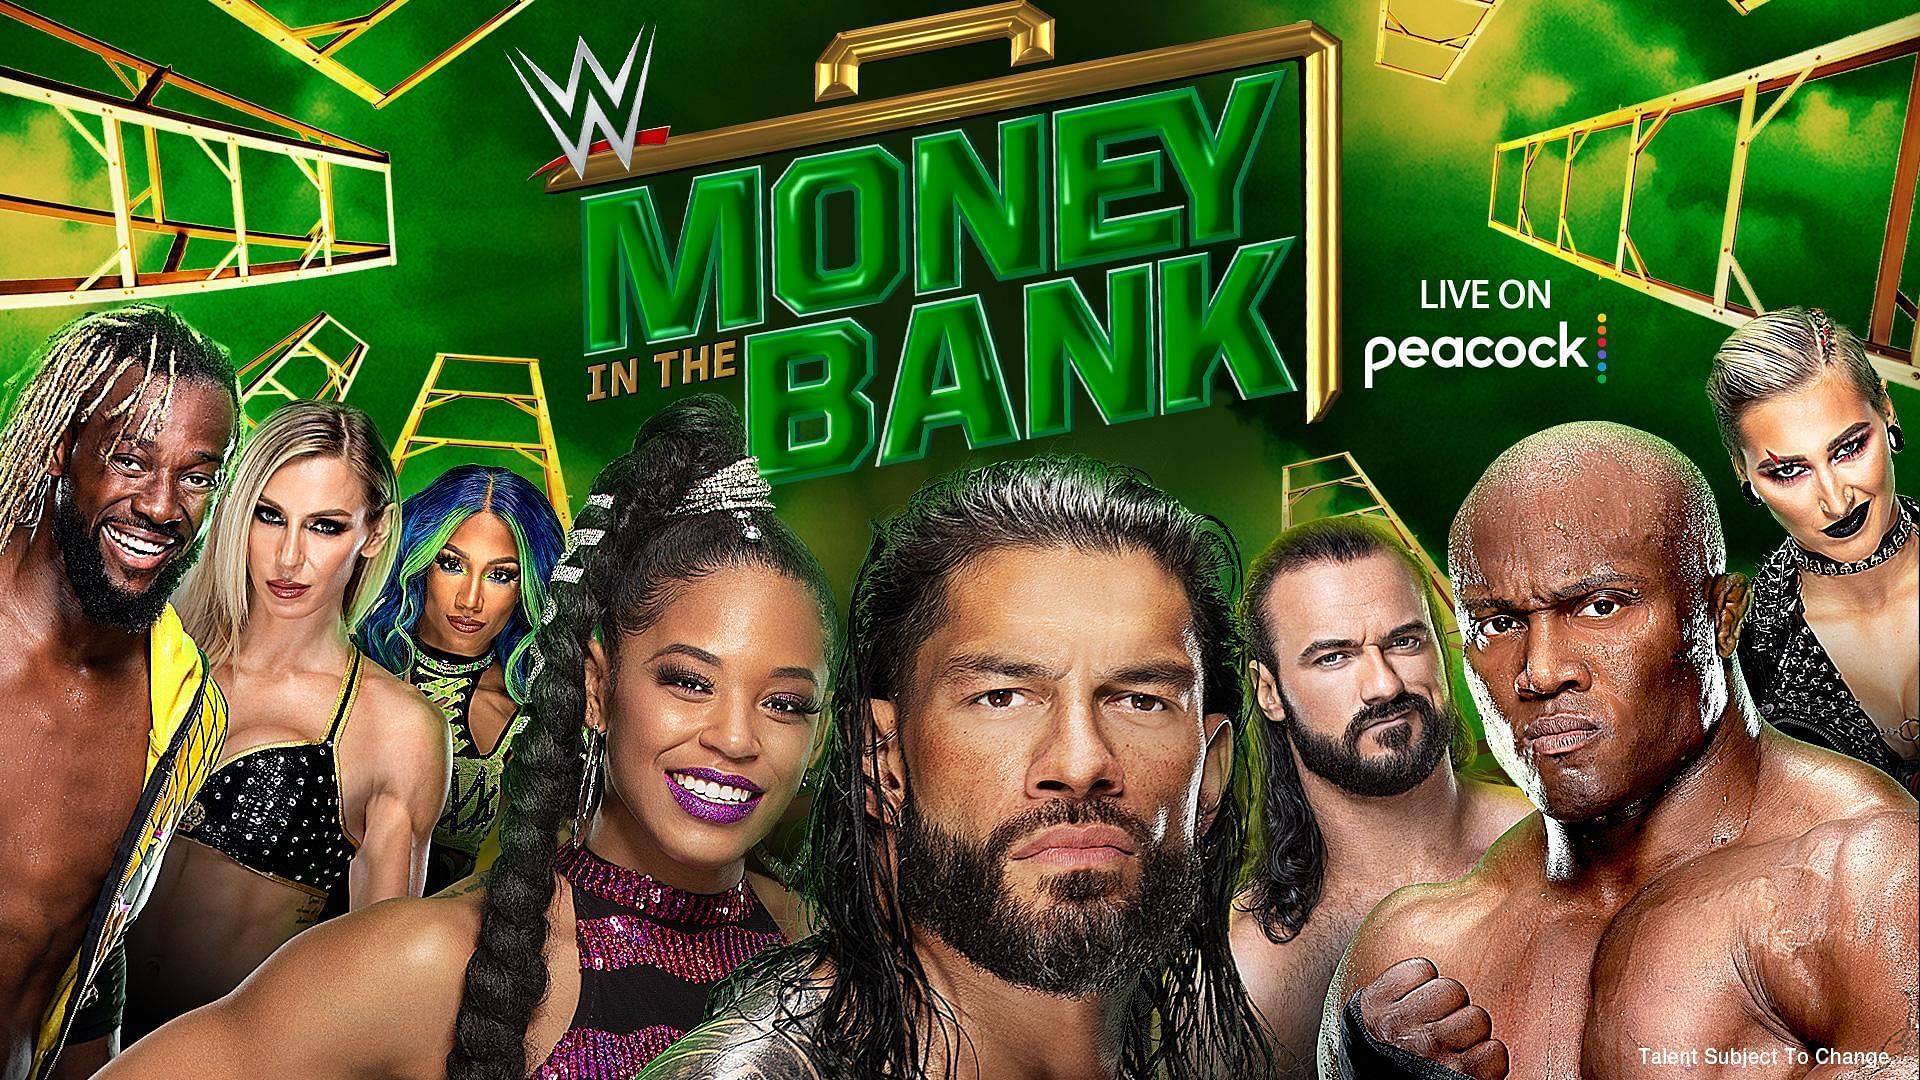 WWE has done well with cashing in on this genius concept